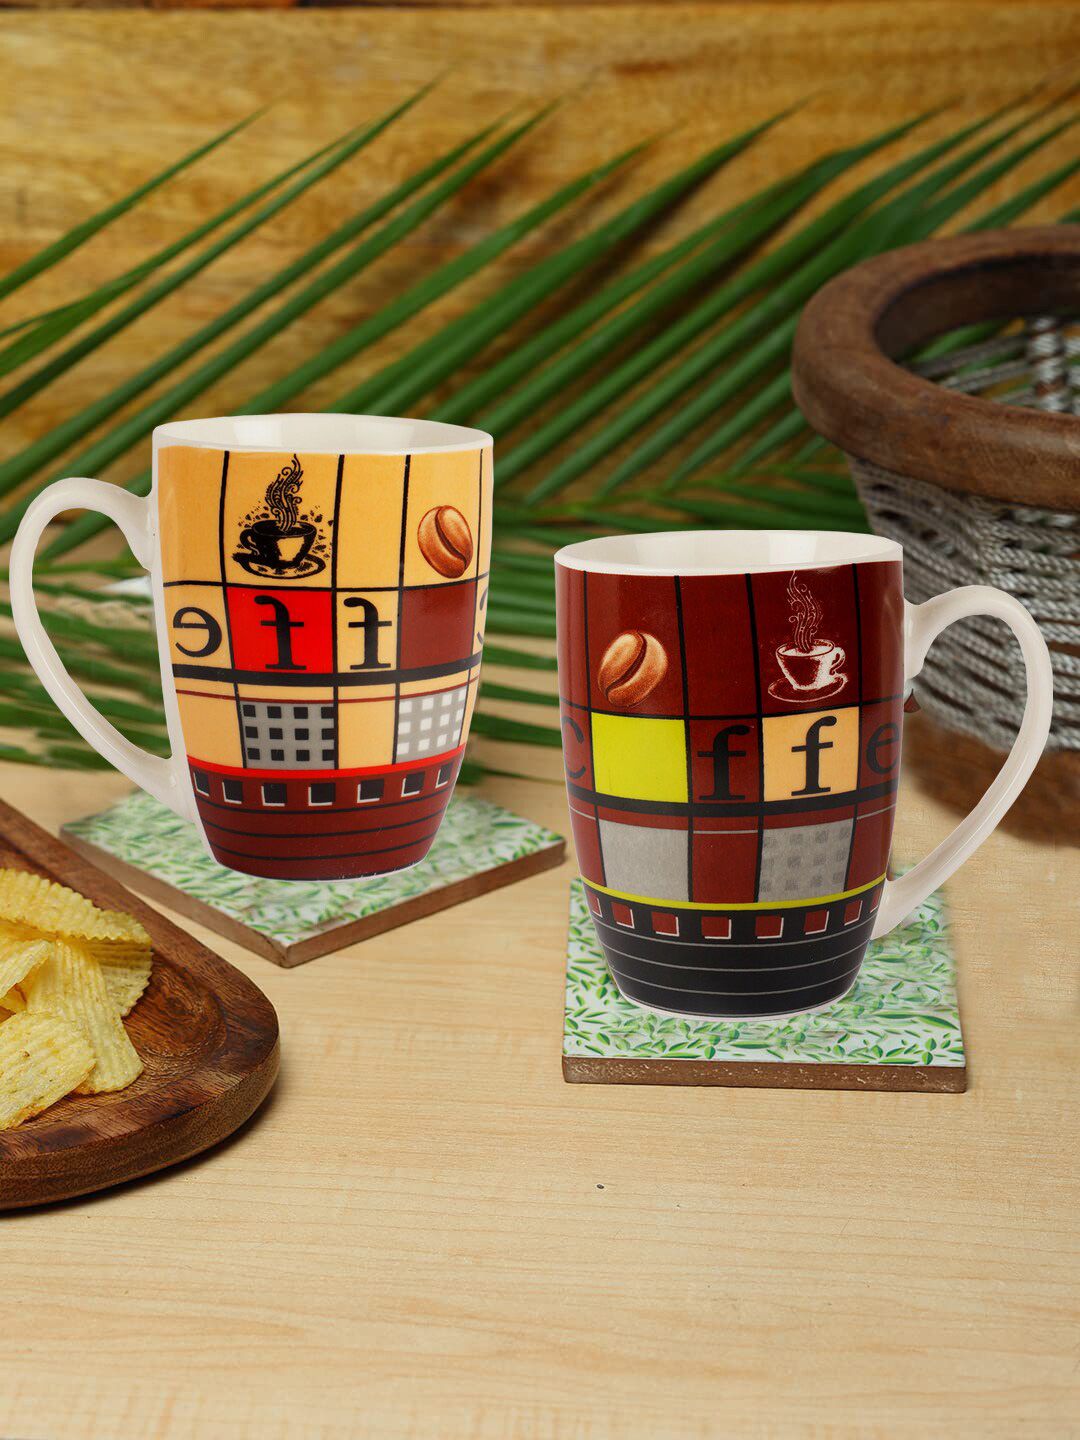 ZEVORA White & Brown Handcrafted Printed Ceramic Glossy Mugs Set of Cups and Mugs Price in India